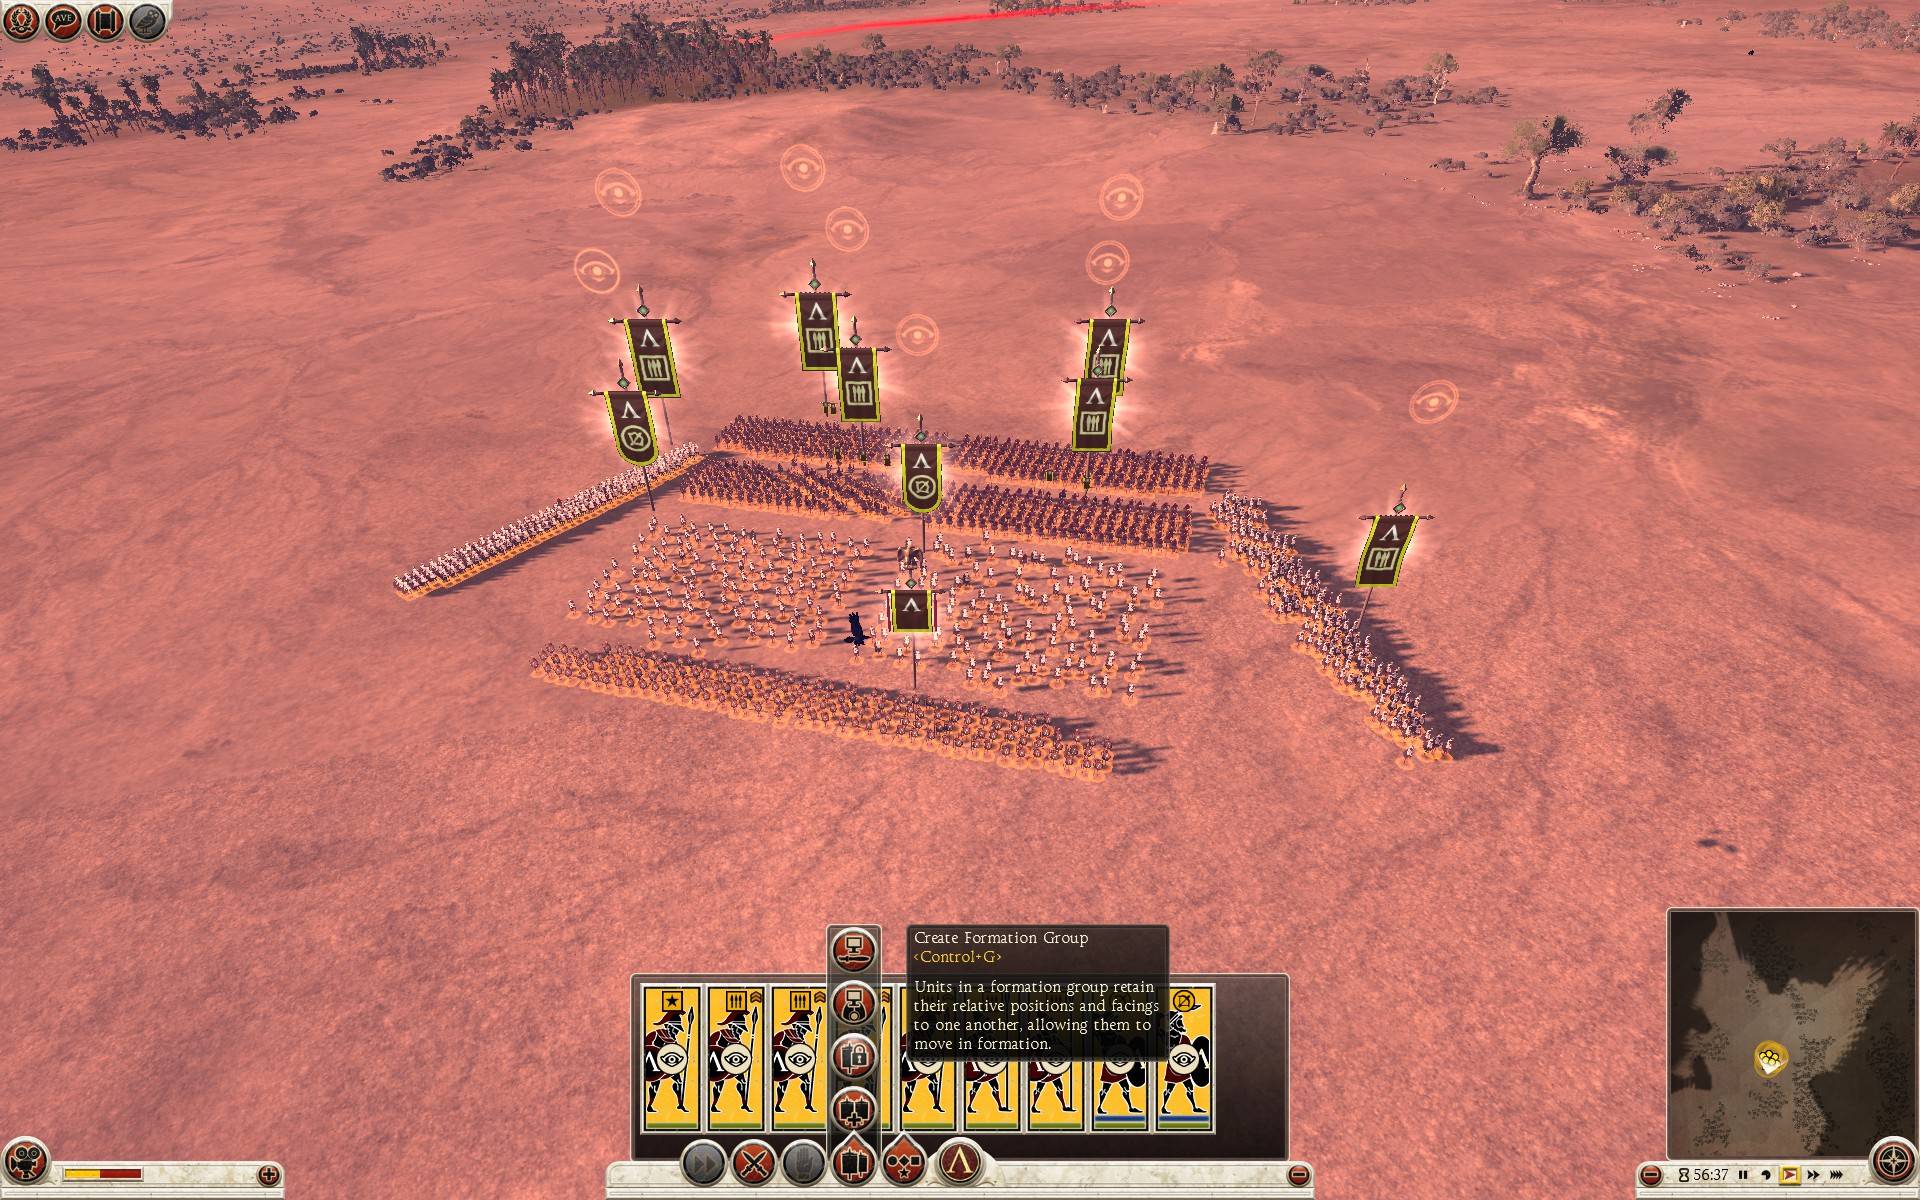 Rome 2: Formations (unit control tips) image 14